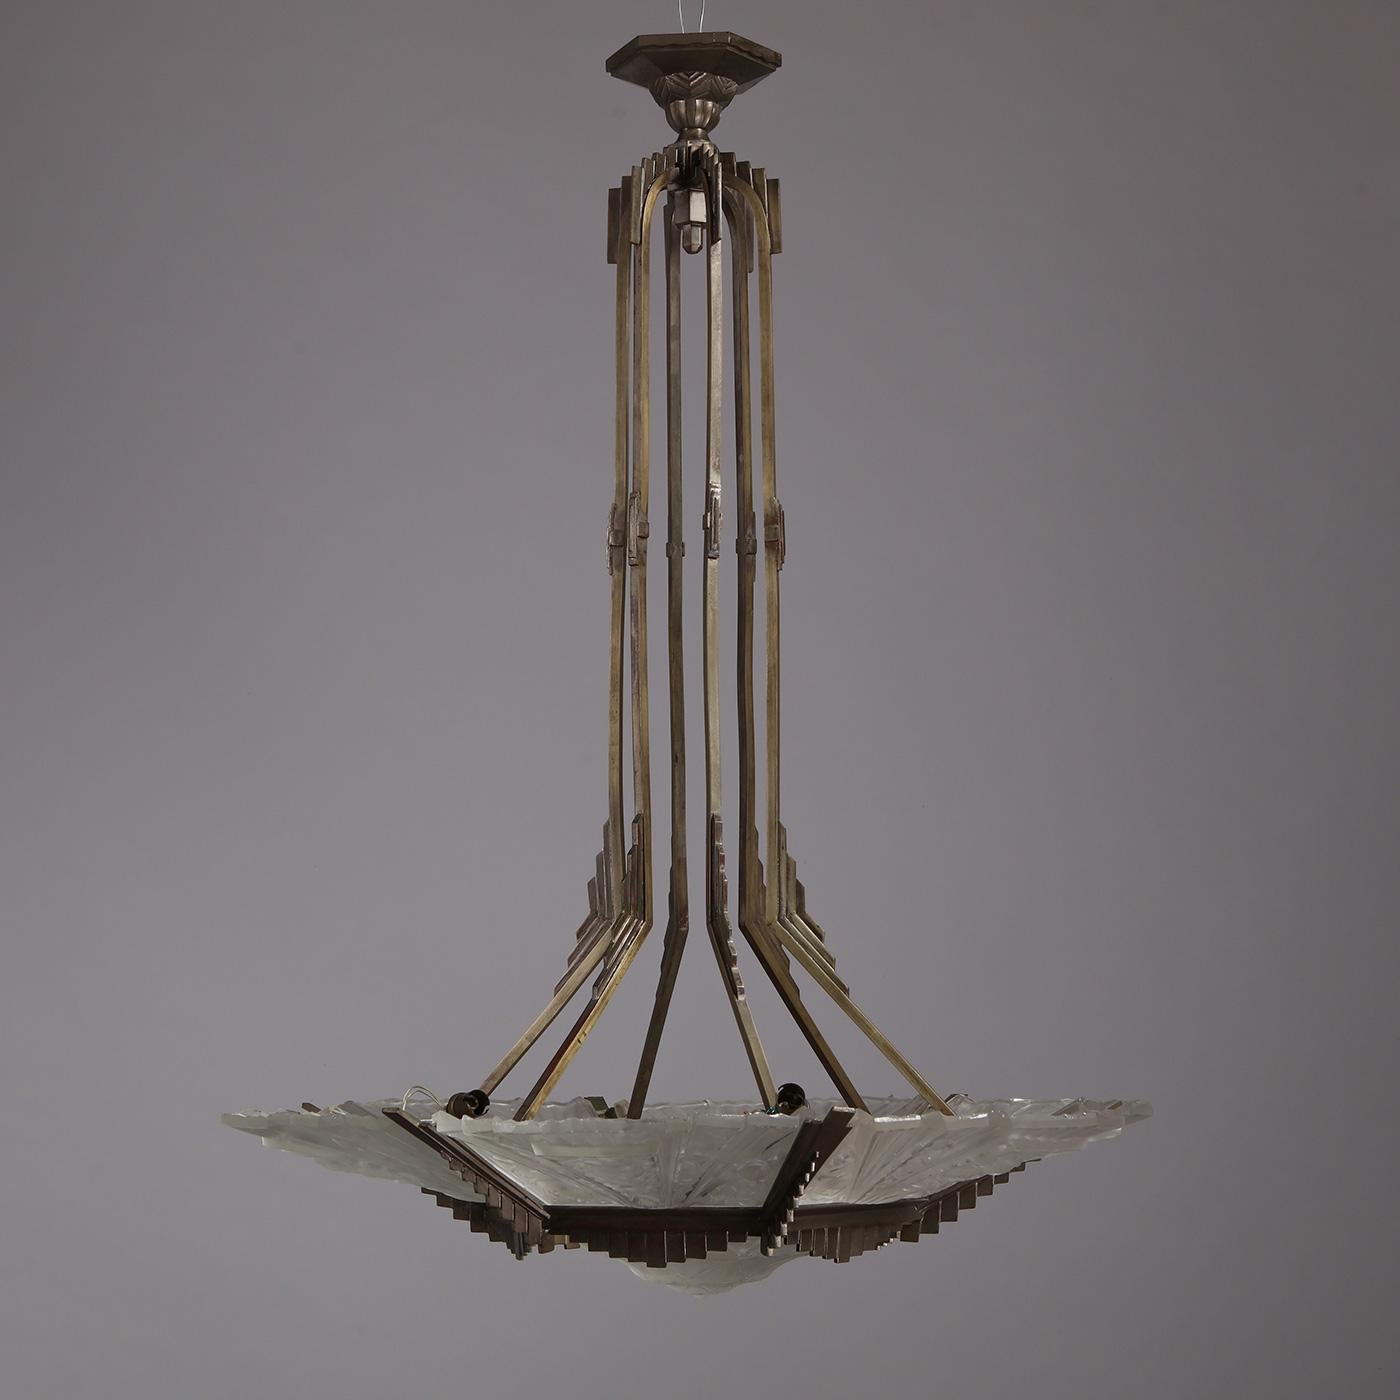 Large French Art Deco glass chandelier made by Maison Hettier & Vincent in collaboration with the famed French manufacturer Verrerie des Hanots, France, 1930s.

This rare large French Art Deco chandelier signed by Verrerie des Hanots is a stunning